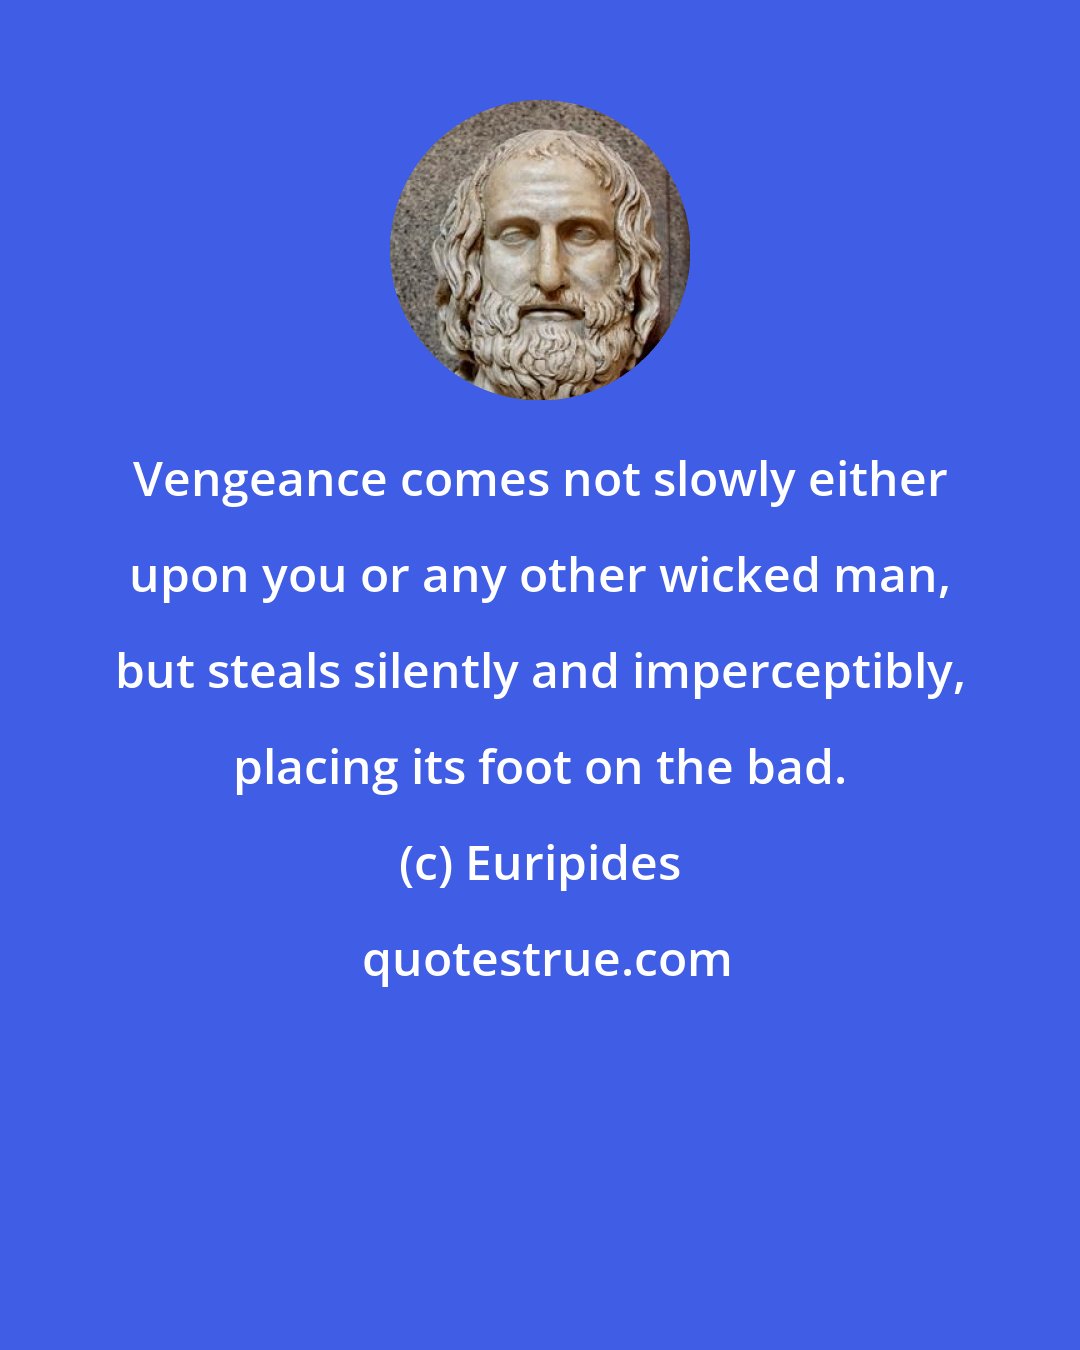 Euripides: Vengeance comes not slowly either upon you or any other wicked man, but steals silently and imperceptibly, placing its foot on the bad.